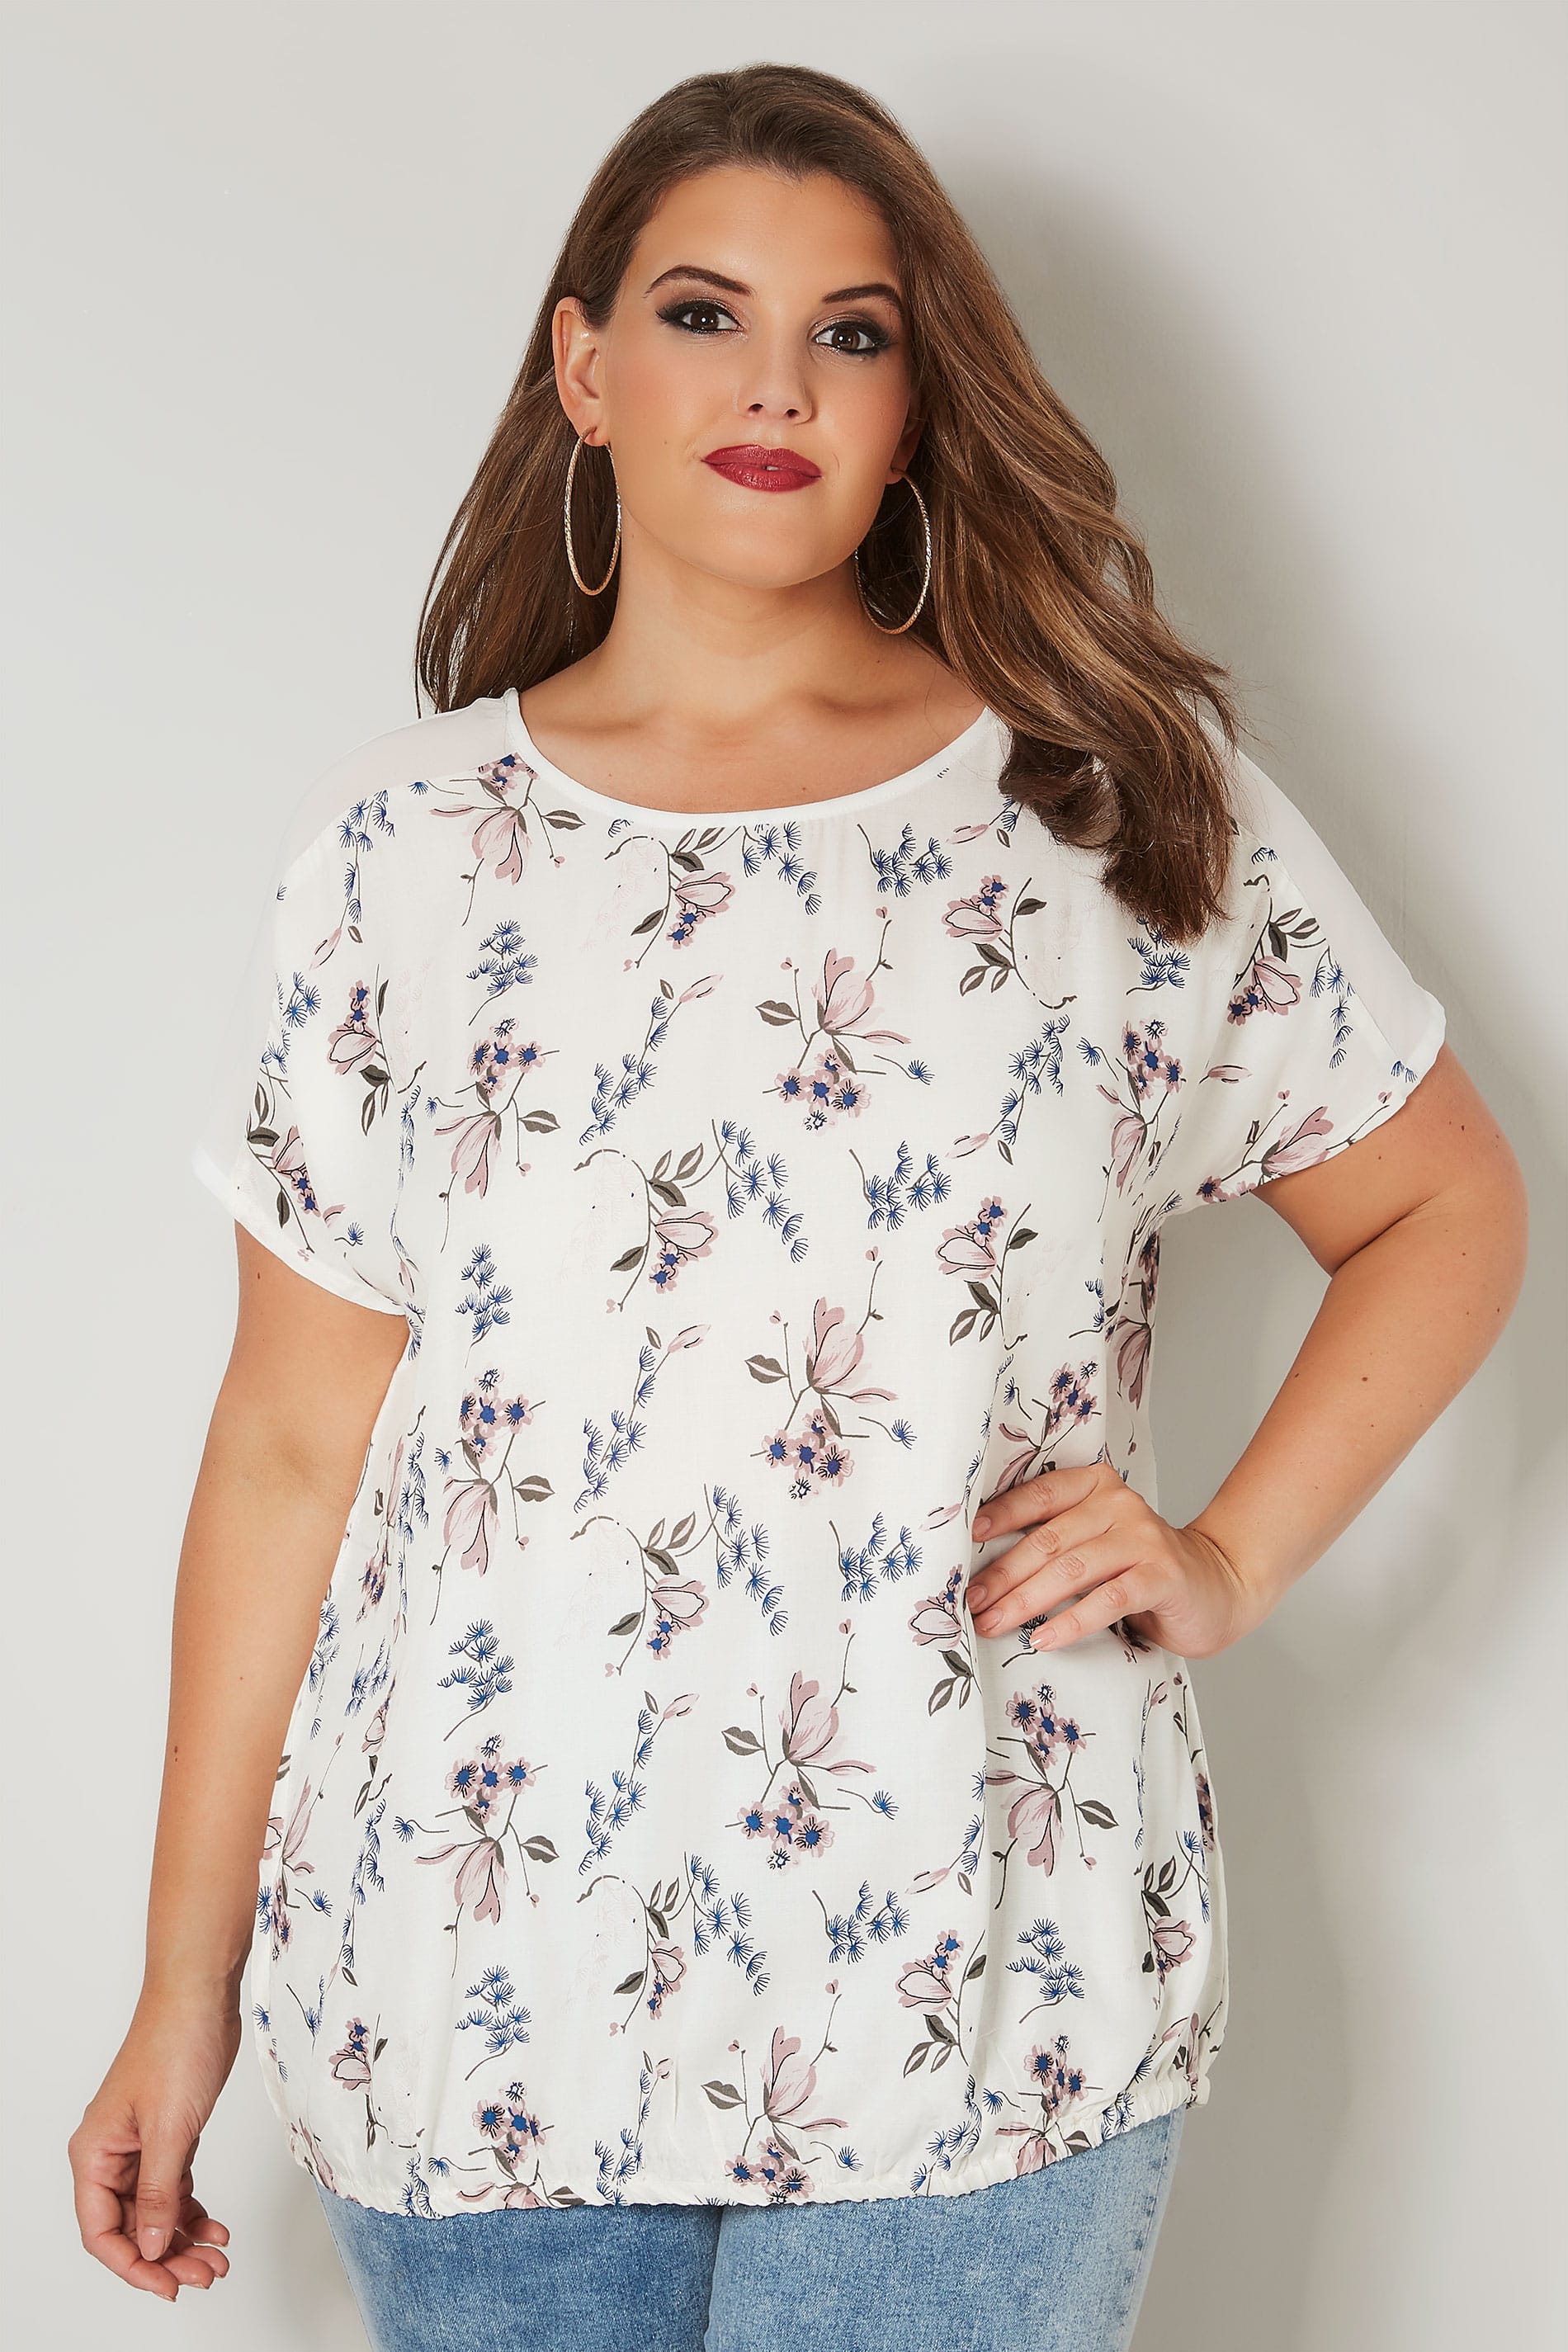 Ivory Floral Woven Bubble Top, Plus size 16 to 36  1